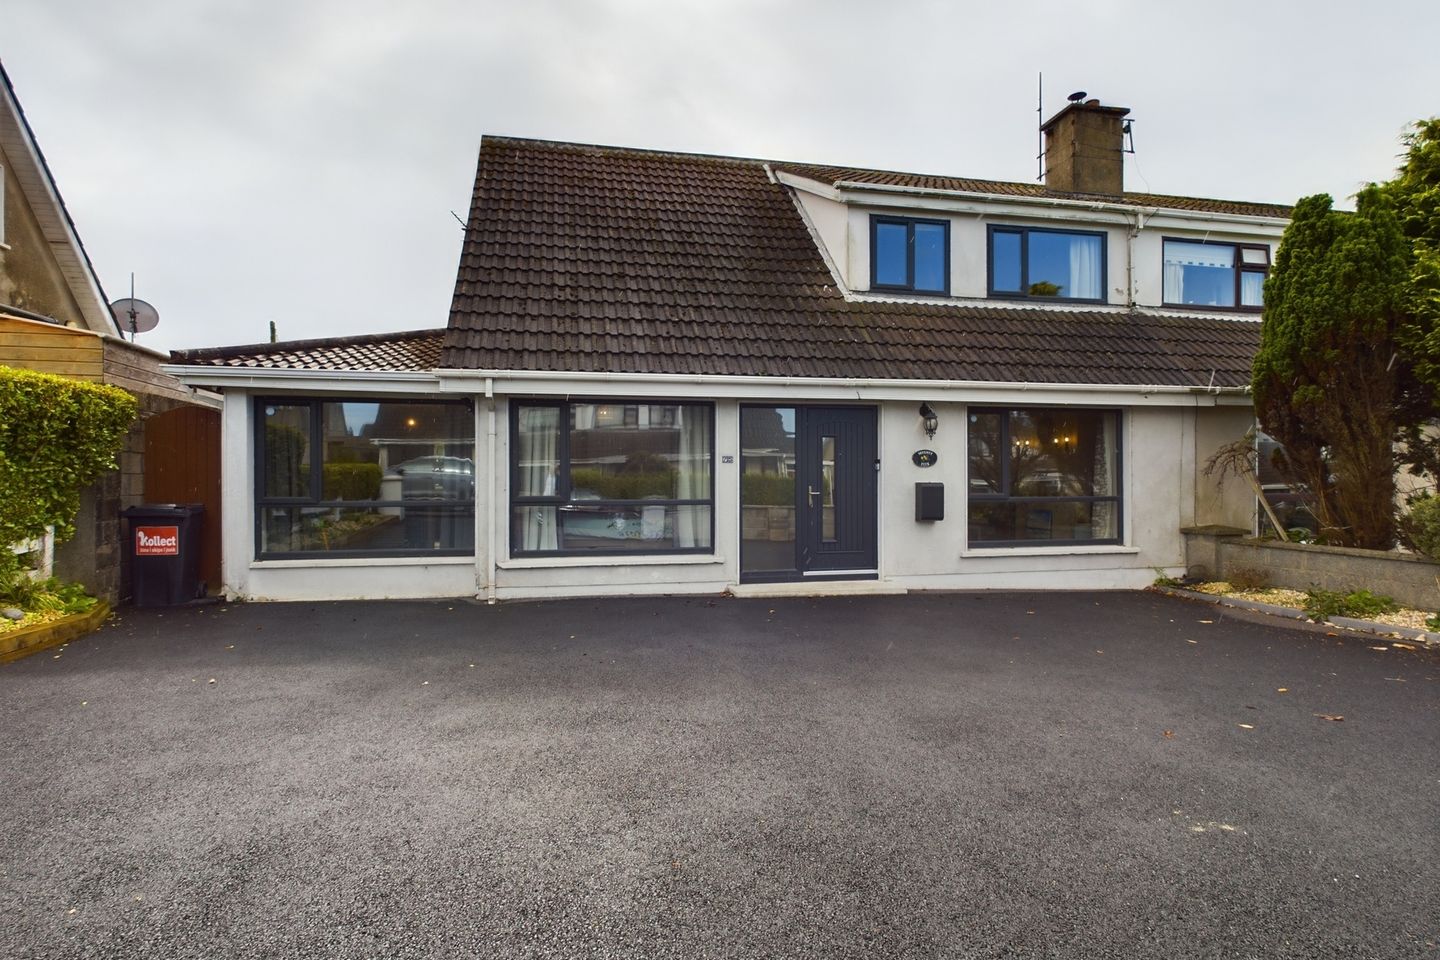 75 Elm Park, Tramore, Co. Waterford, X91YV84